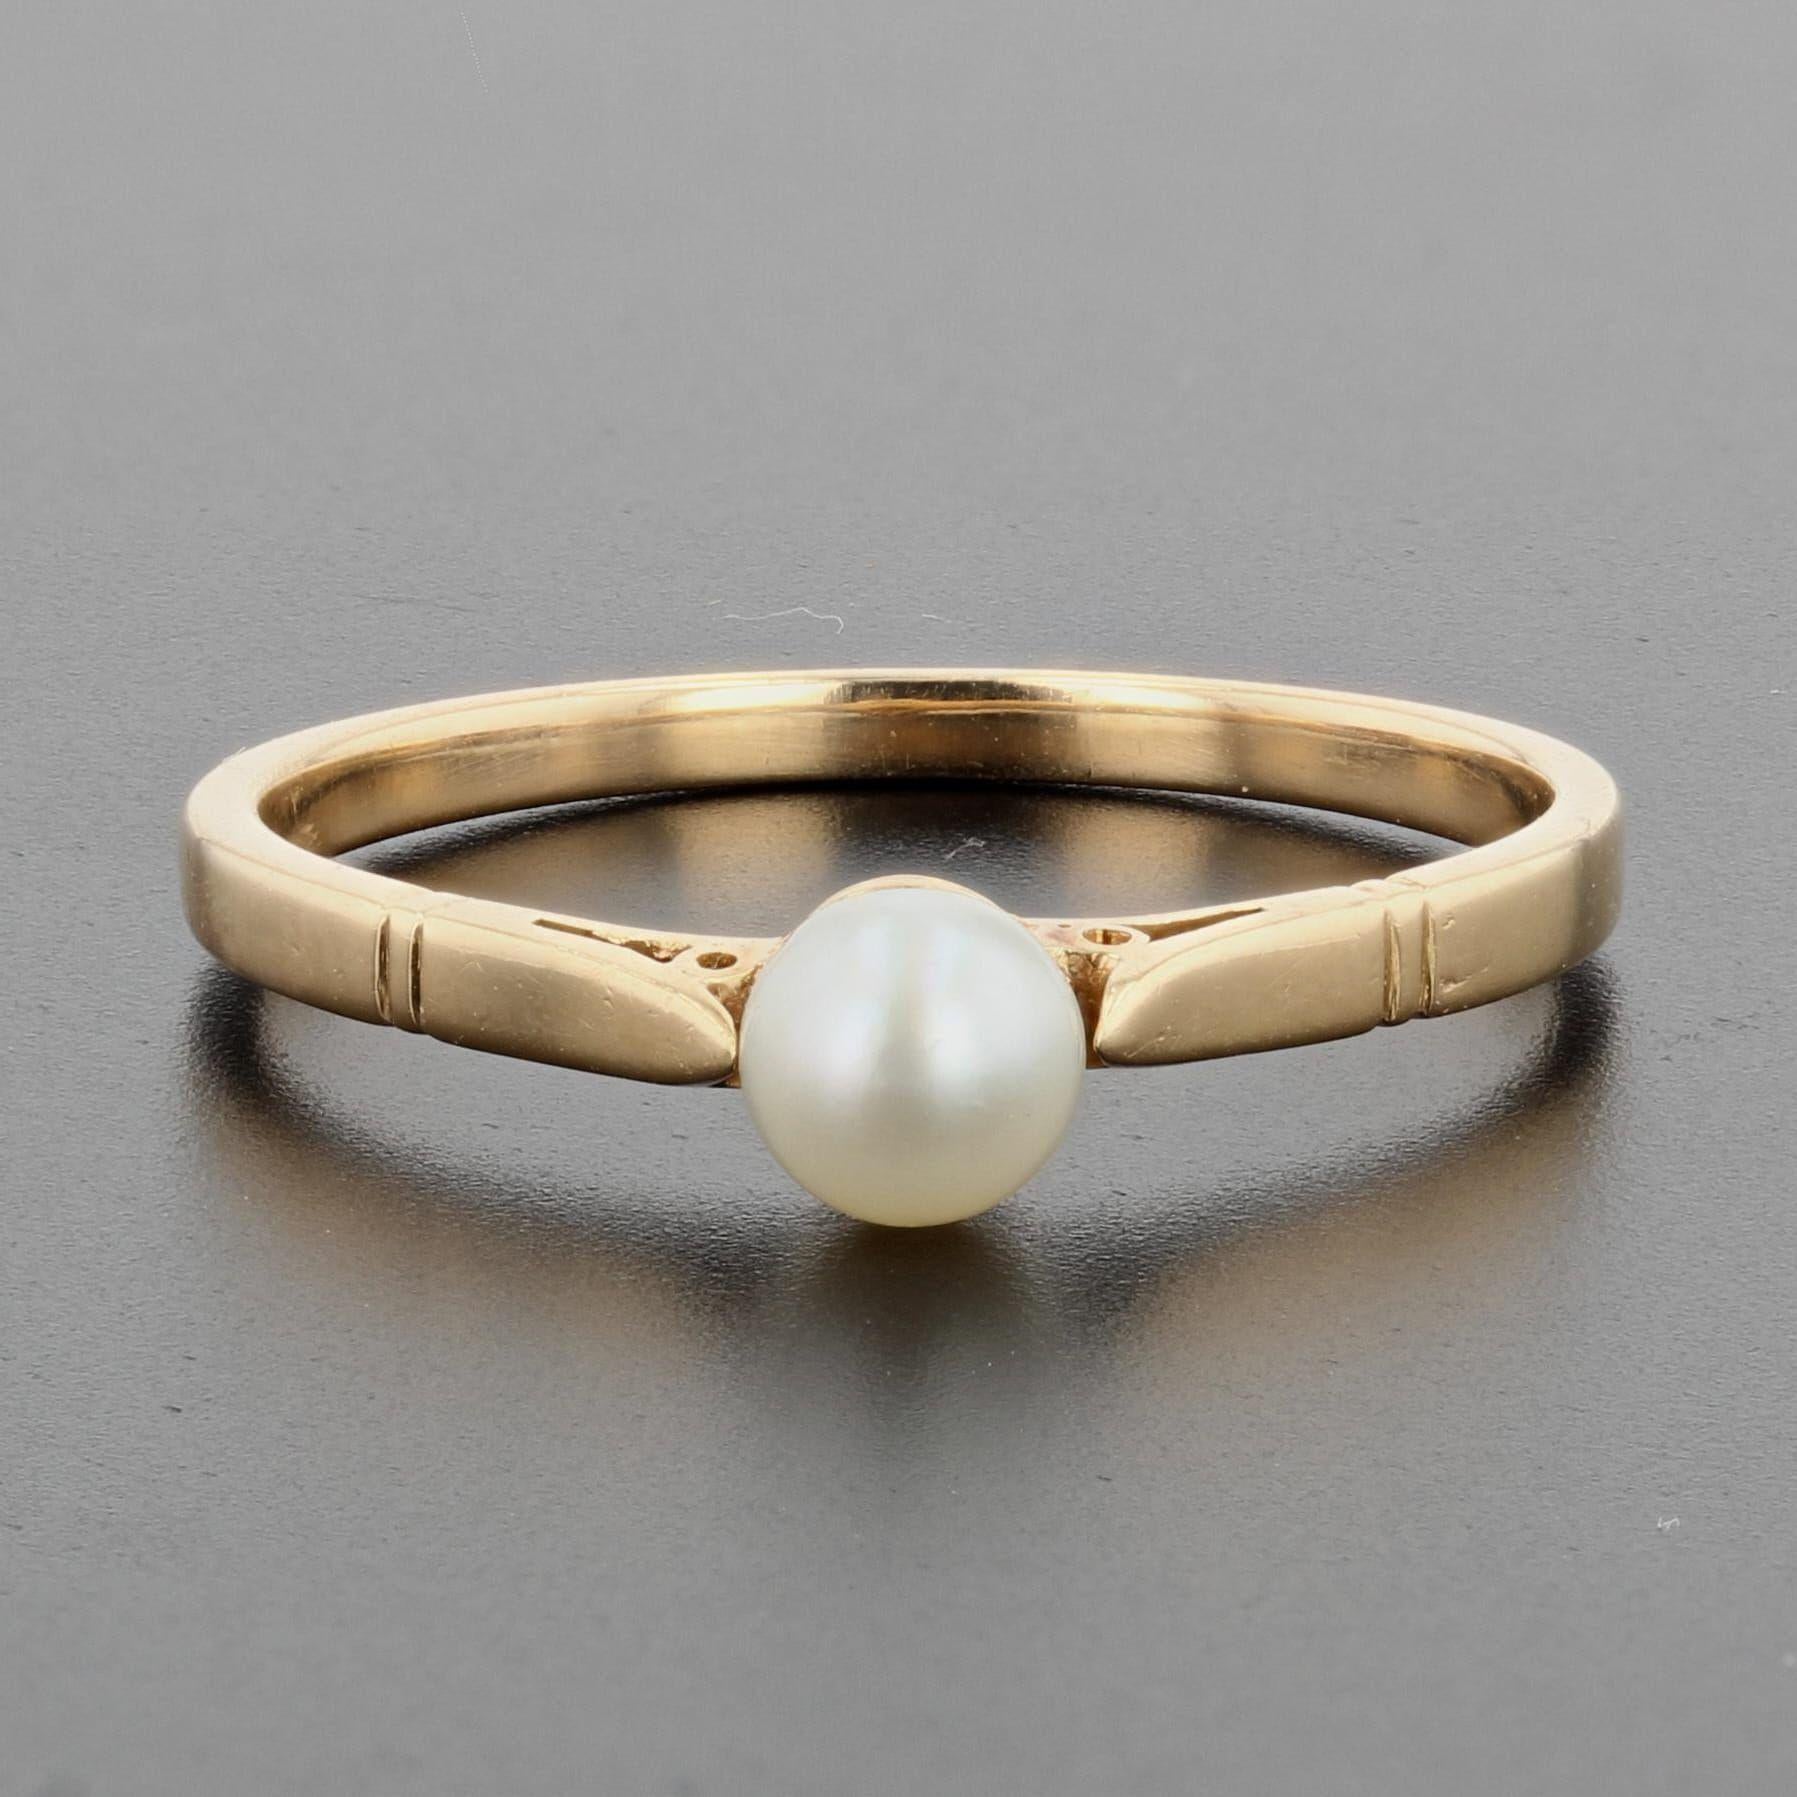 Retro 1960s Solitaire Pearl 18 Karat Yellow Gold Ring